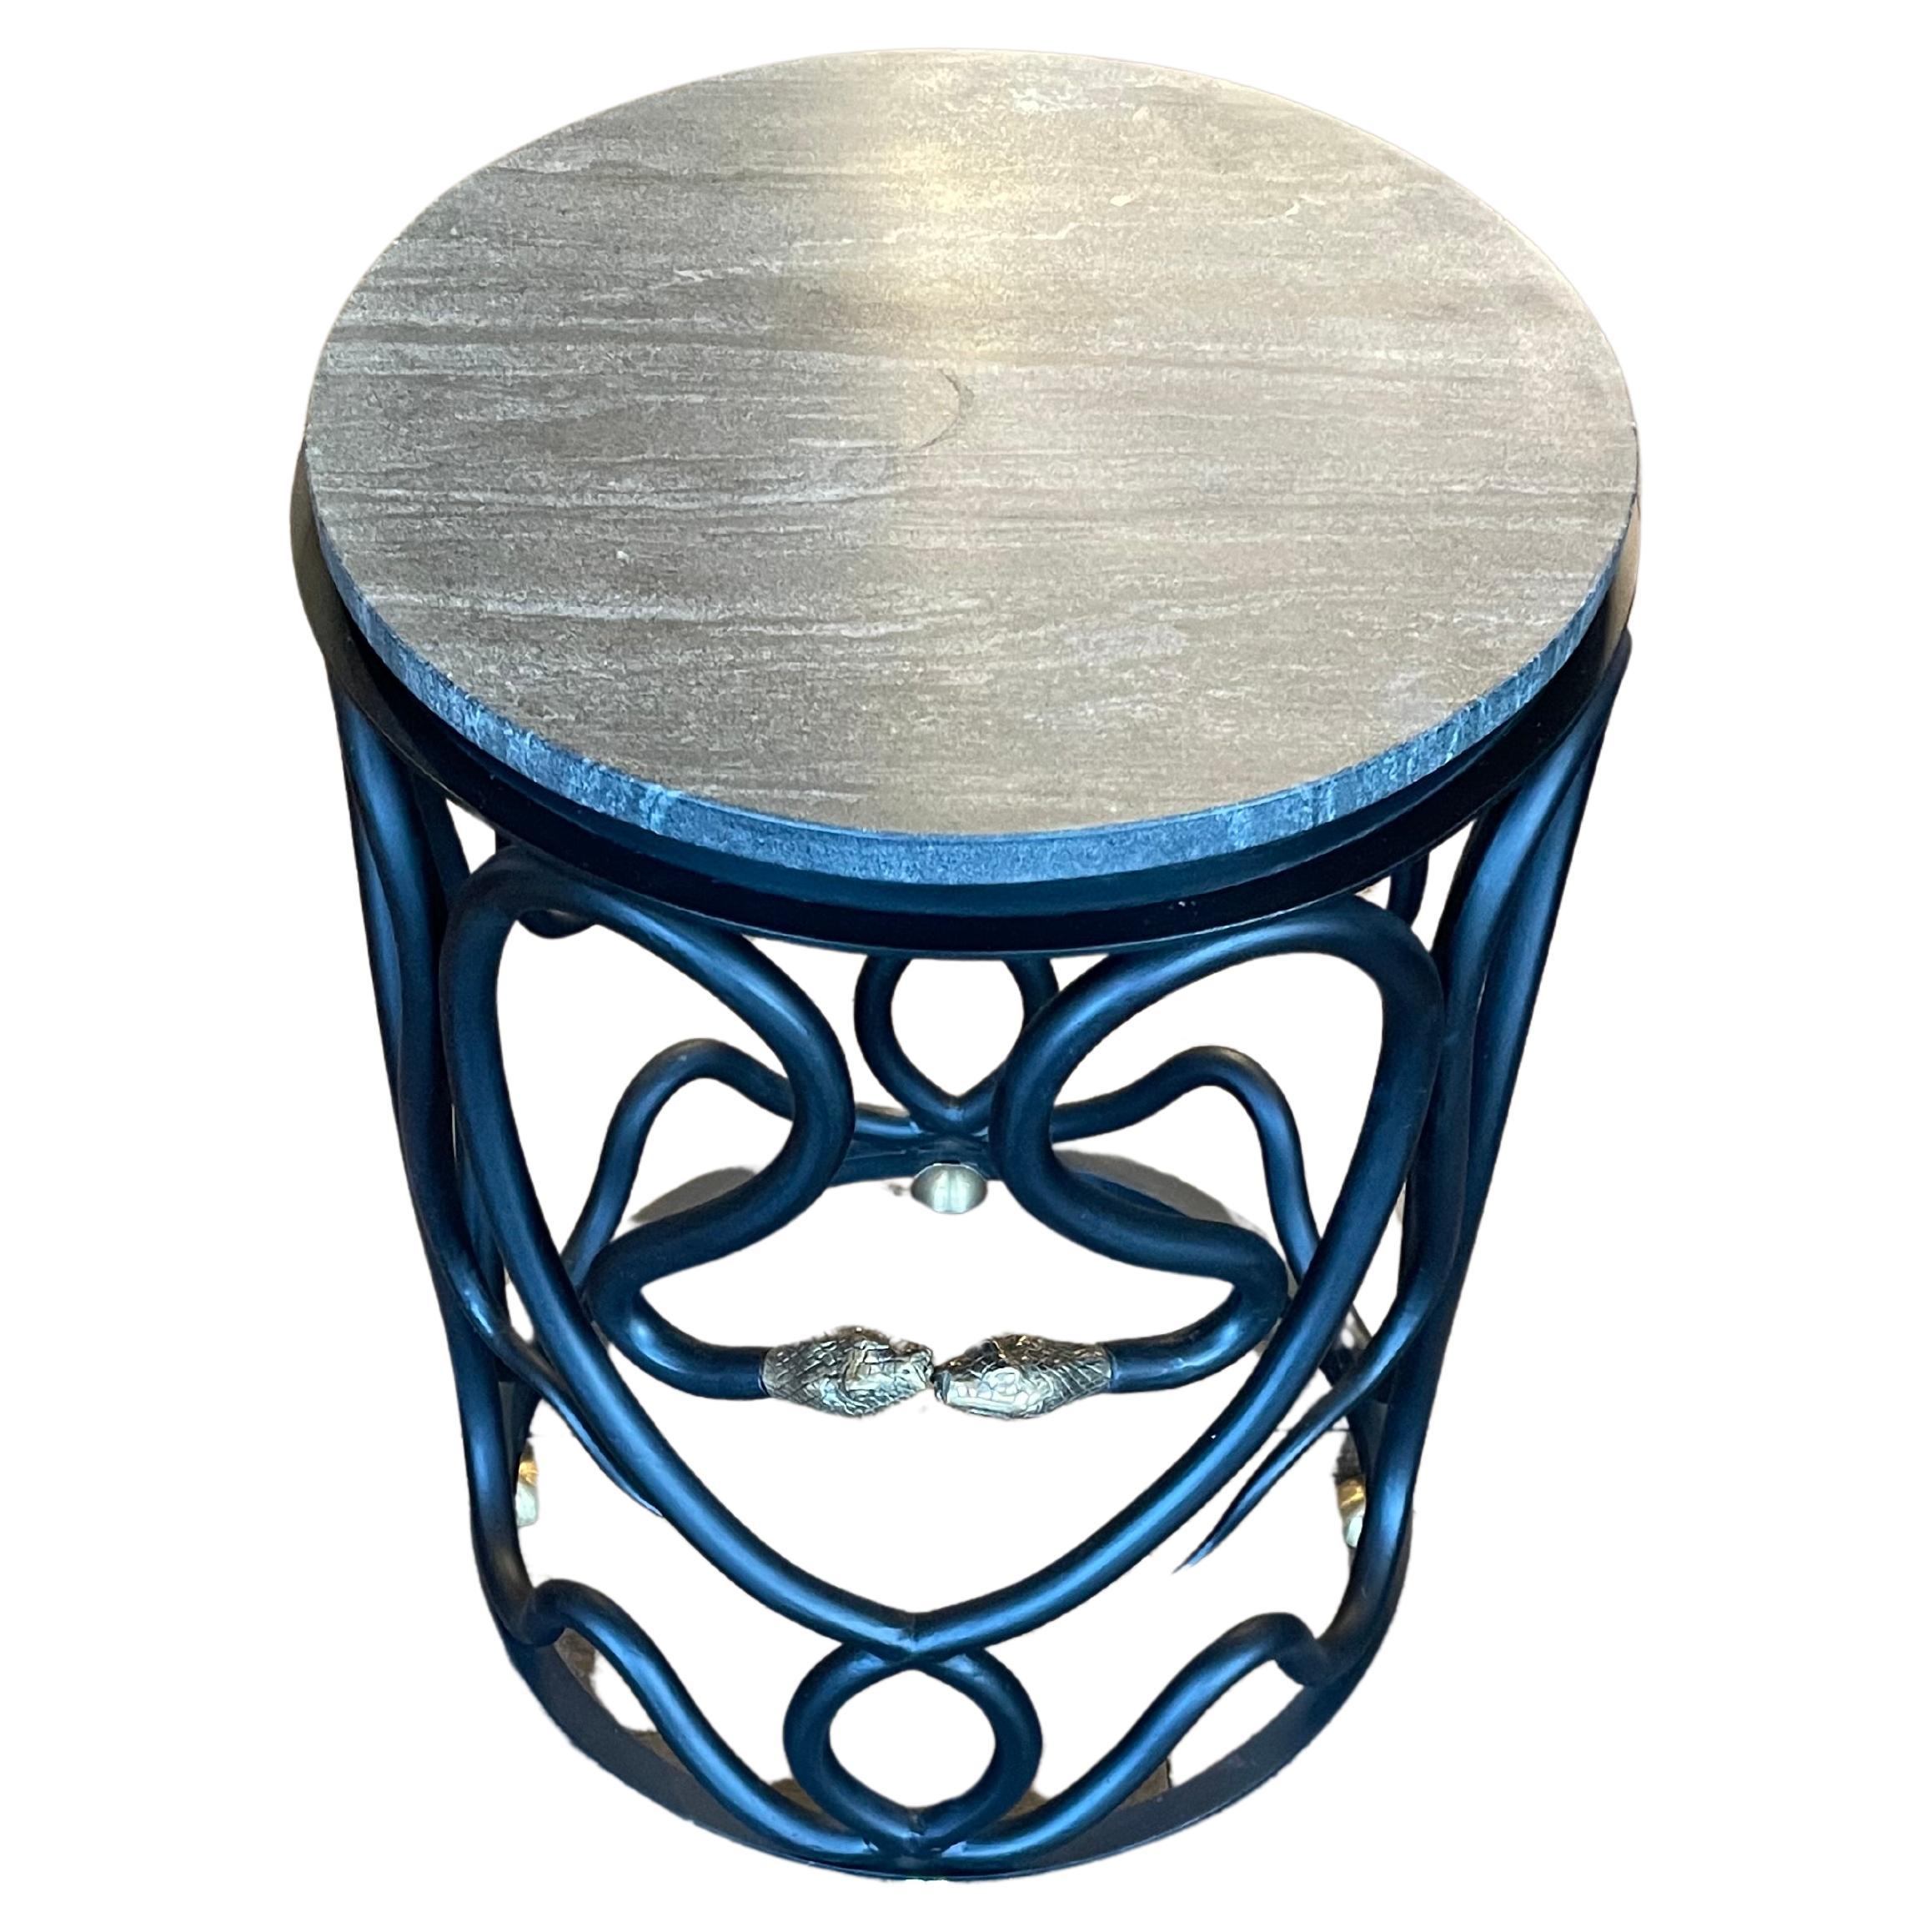 Serpentine Cement-Top End Table by Paul Marra For Sale